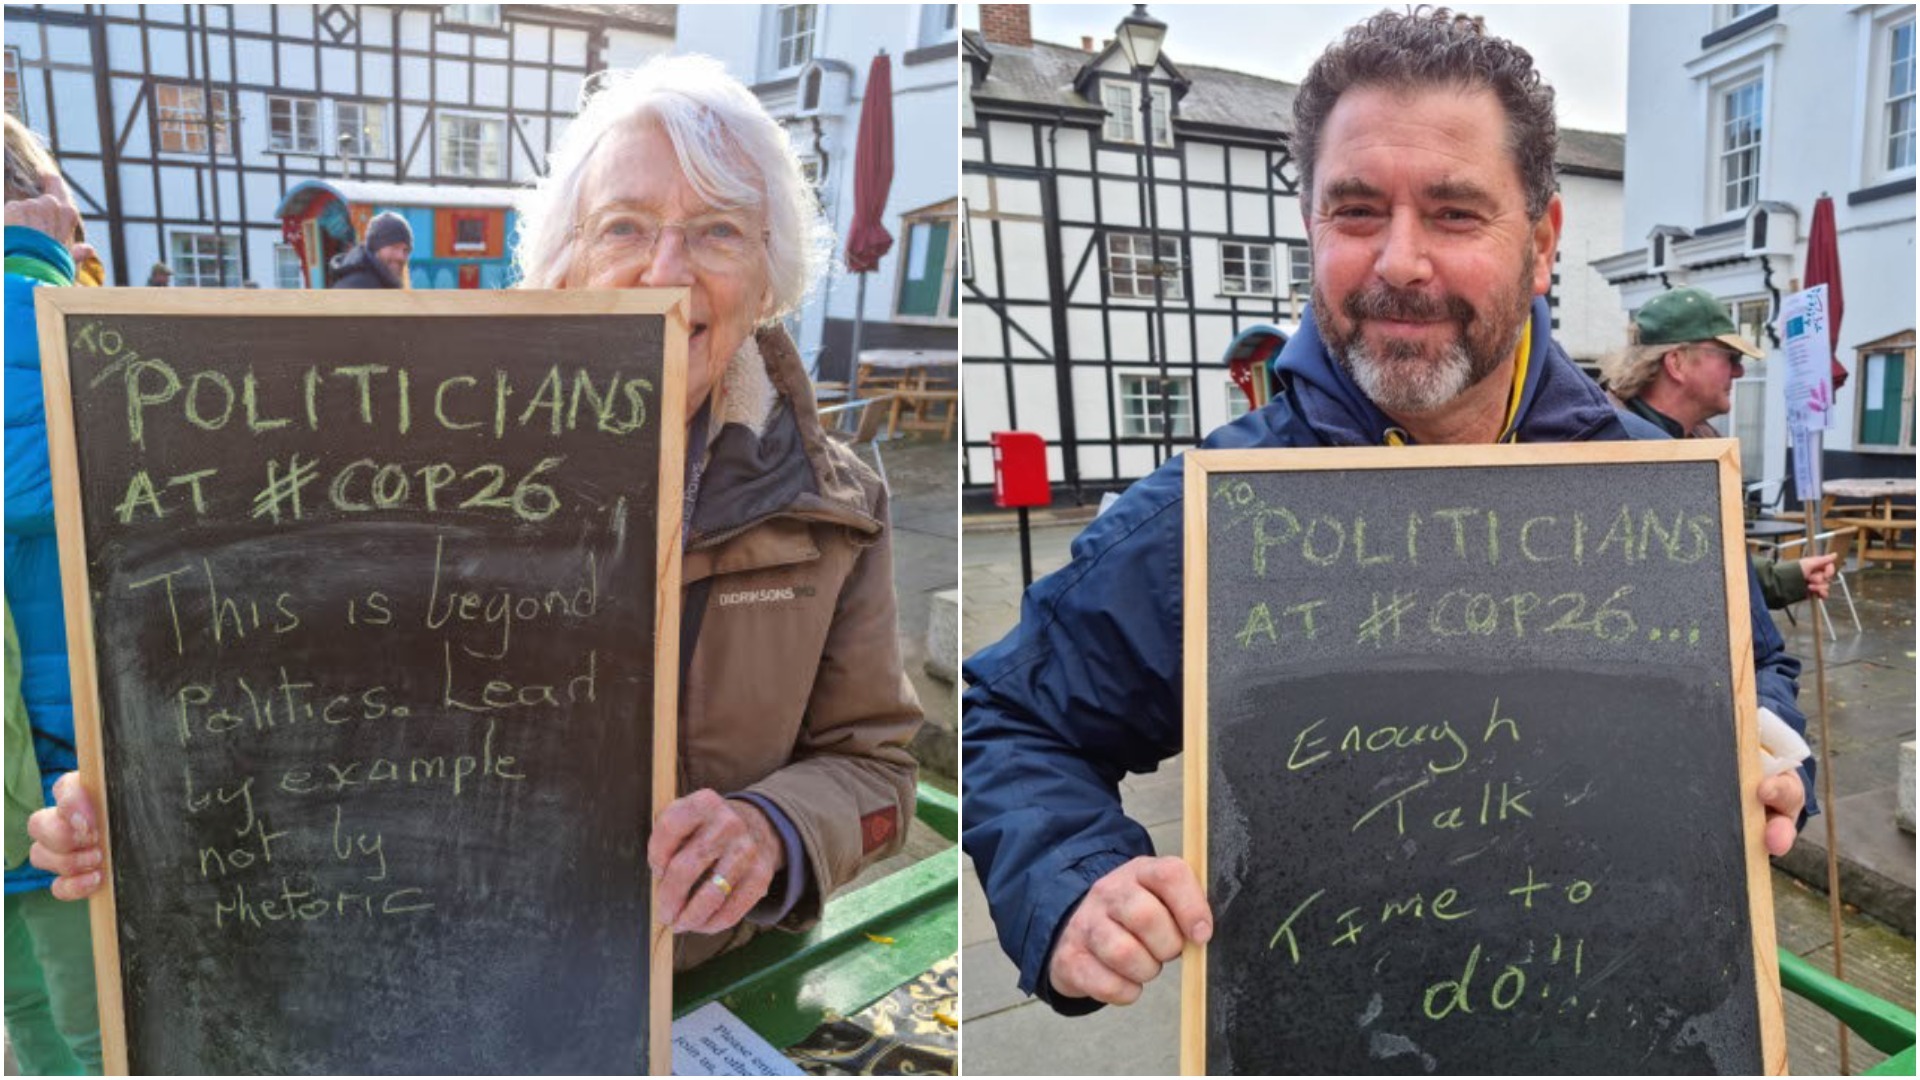 Llanfyllin residents take part in a climate change demonstration in the town on November 6, 2021. Pictures by BRACE Cymru